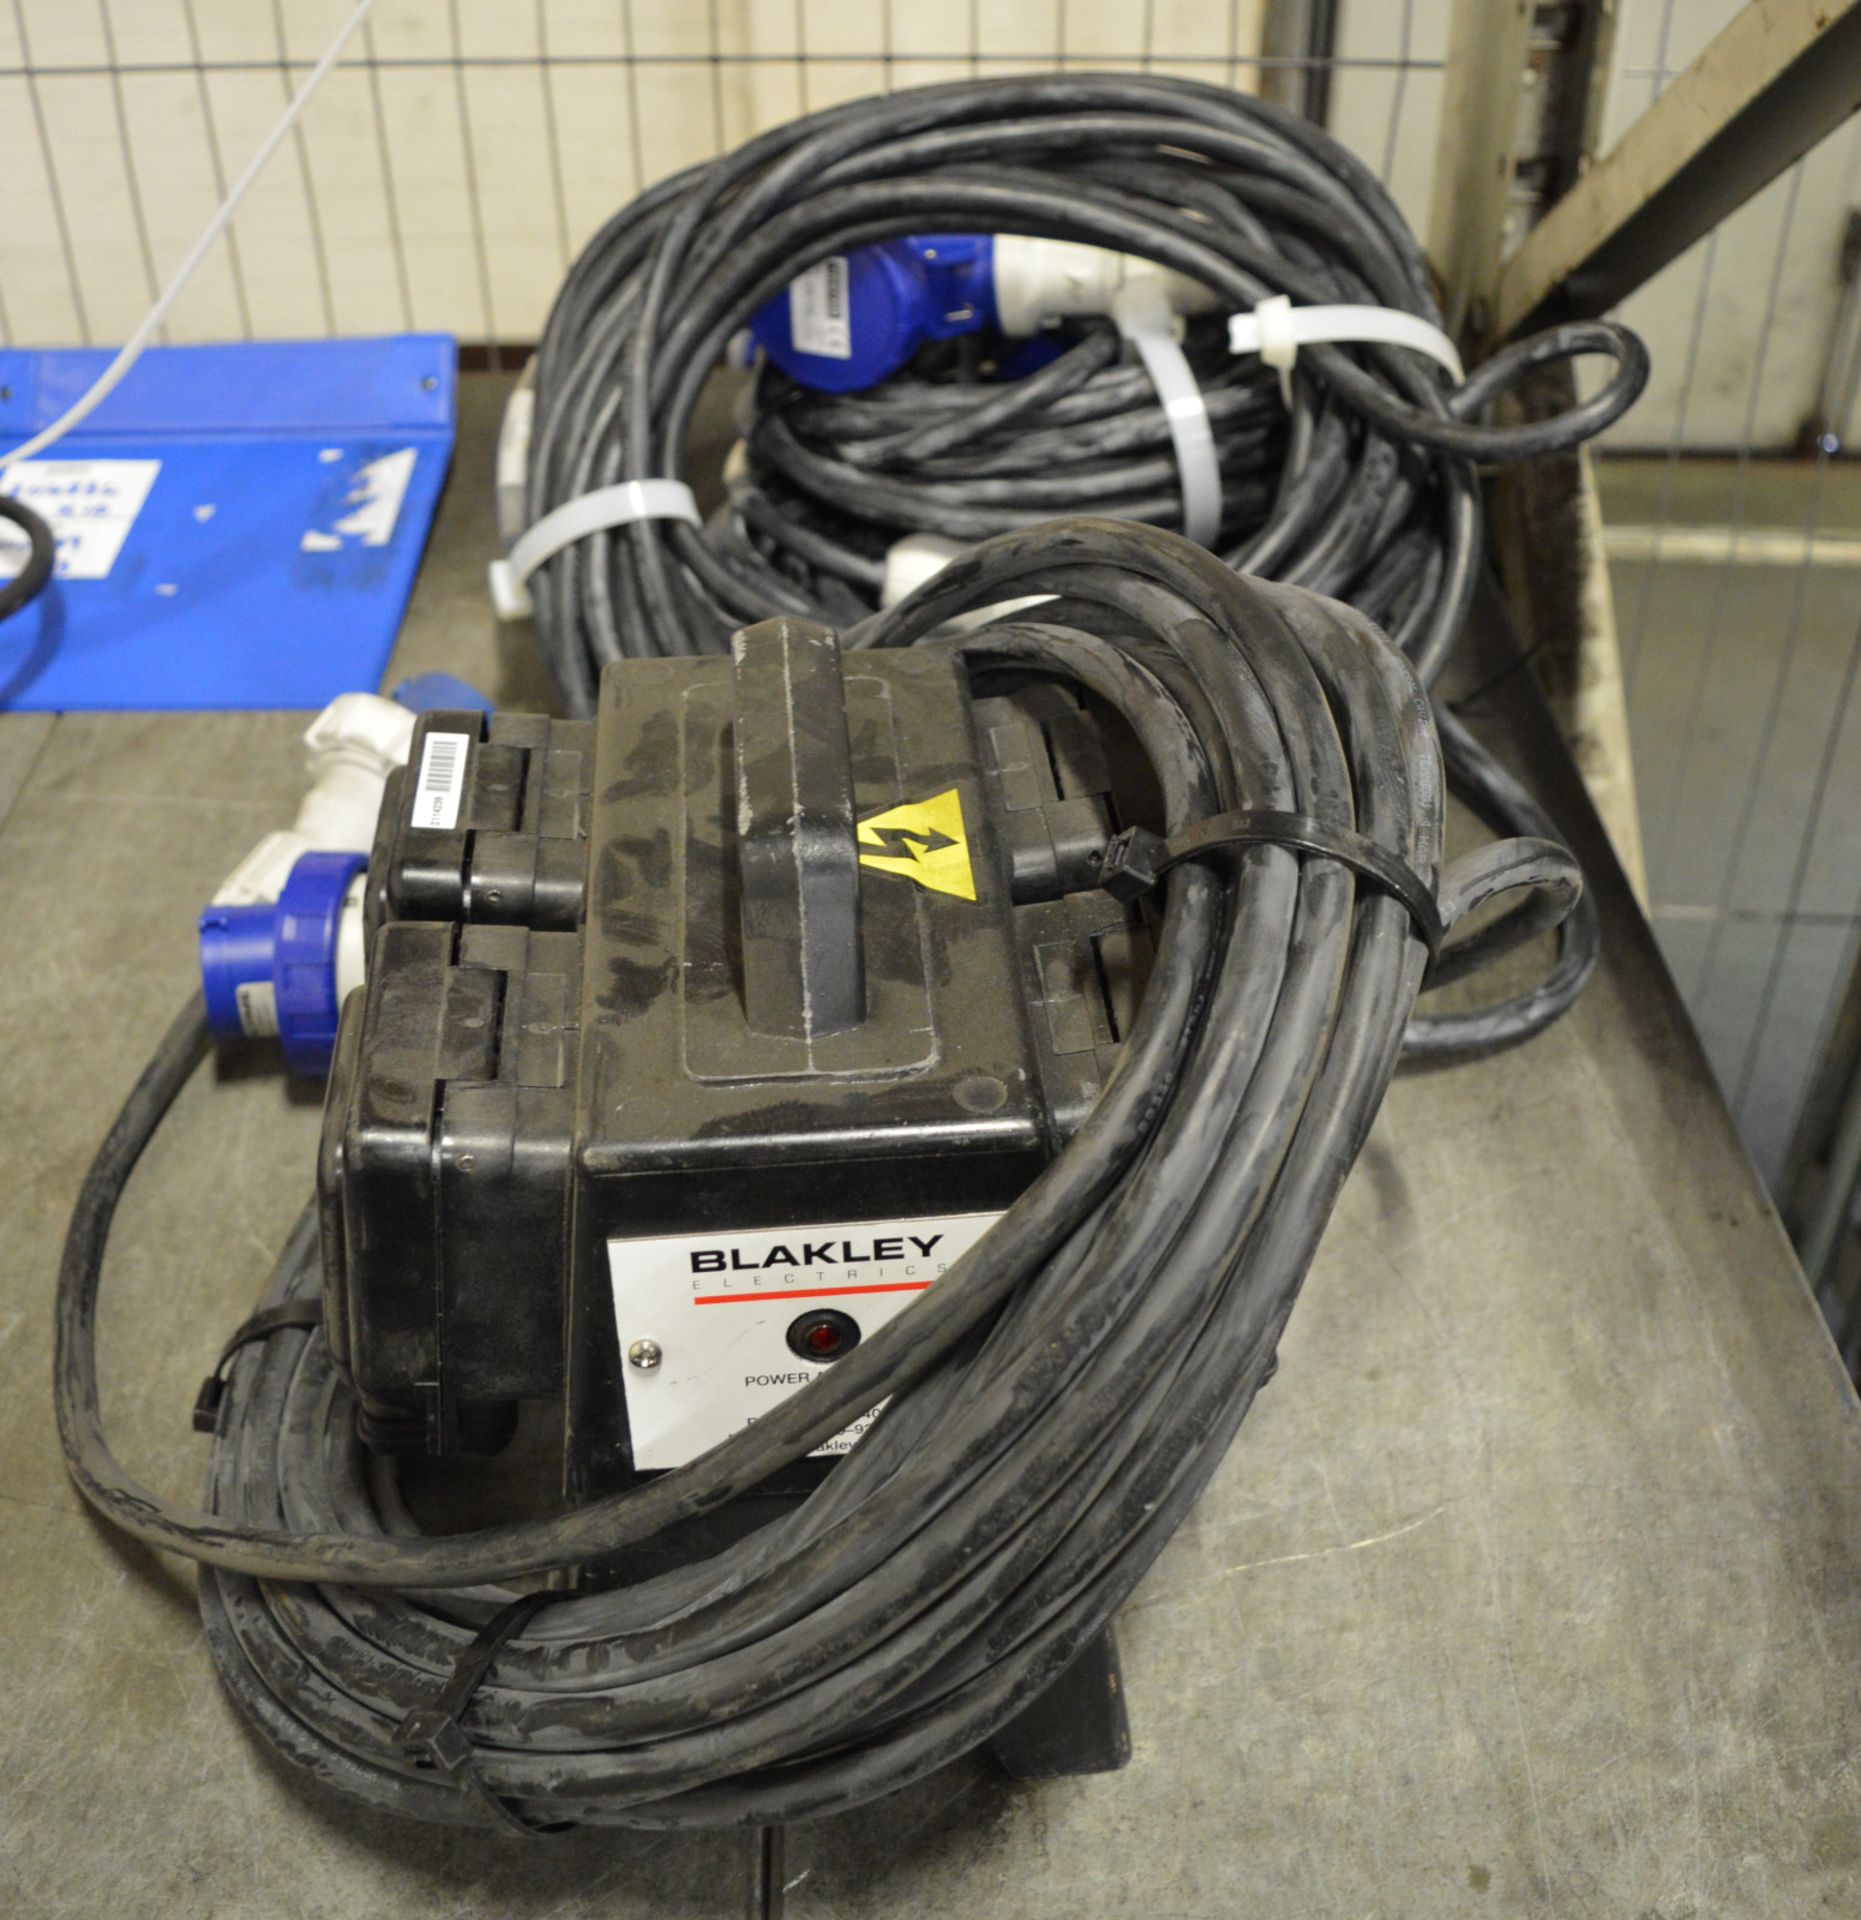 1x Blakley Domestic Power Unit with 16A Cable. 3x 16A Extension Leads.